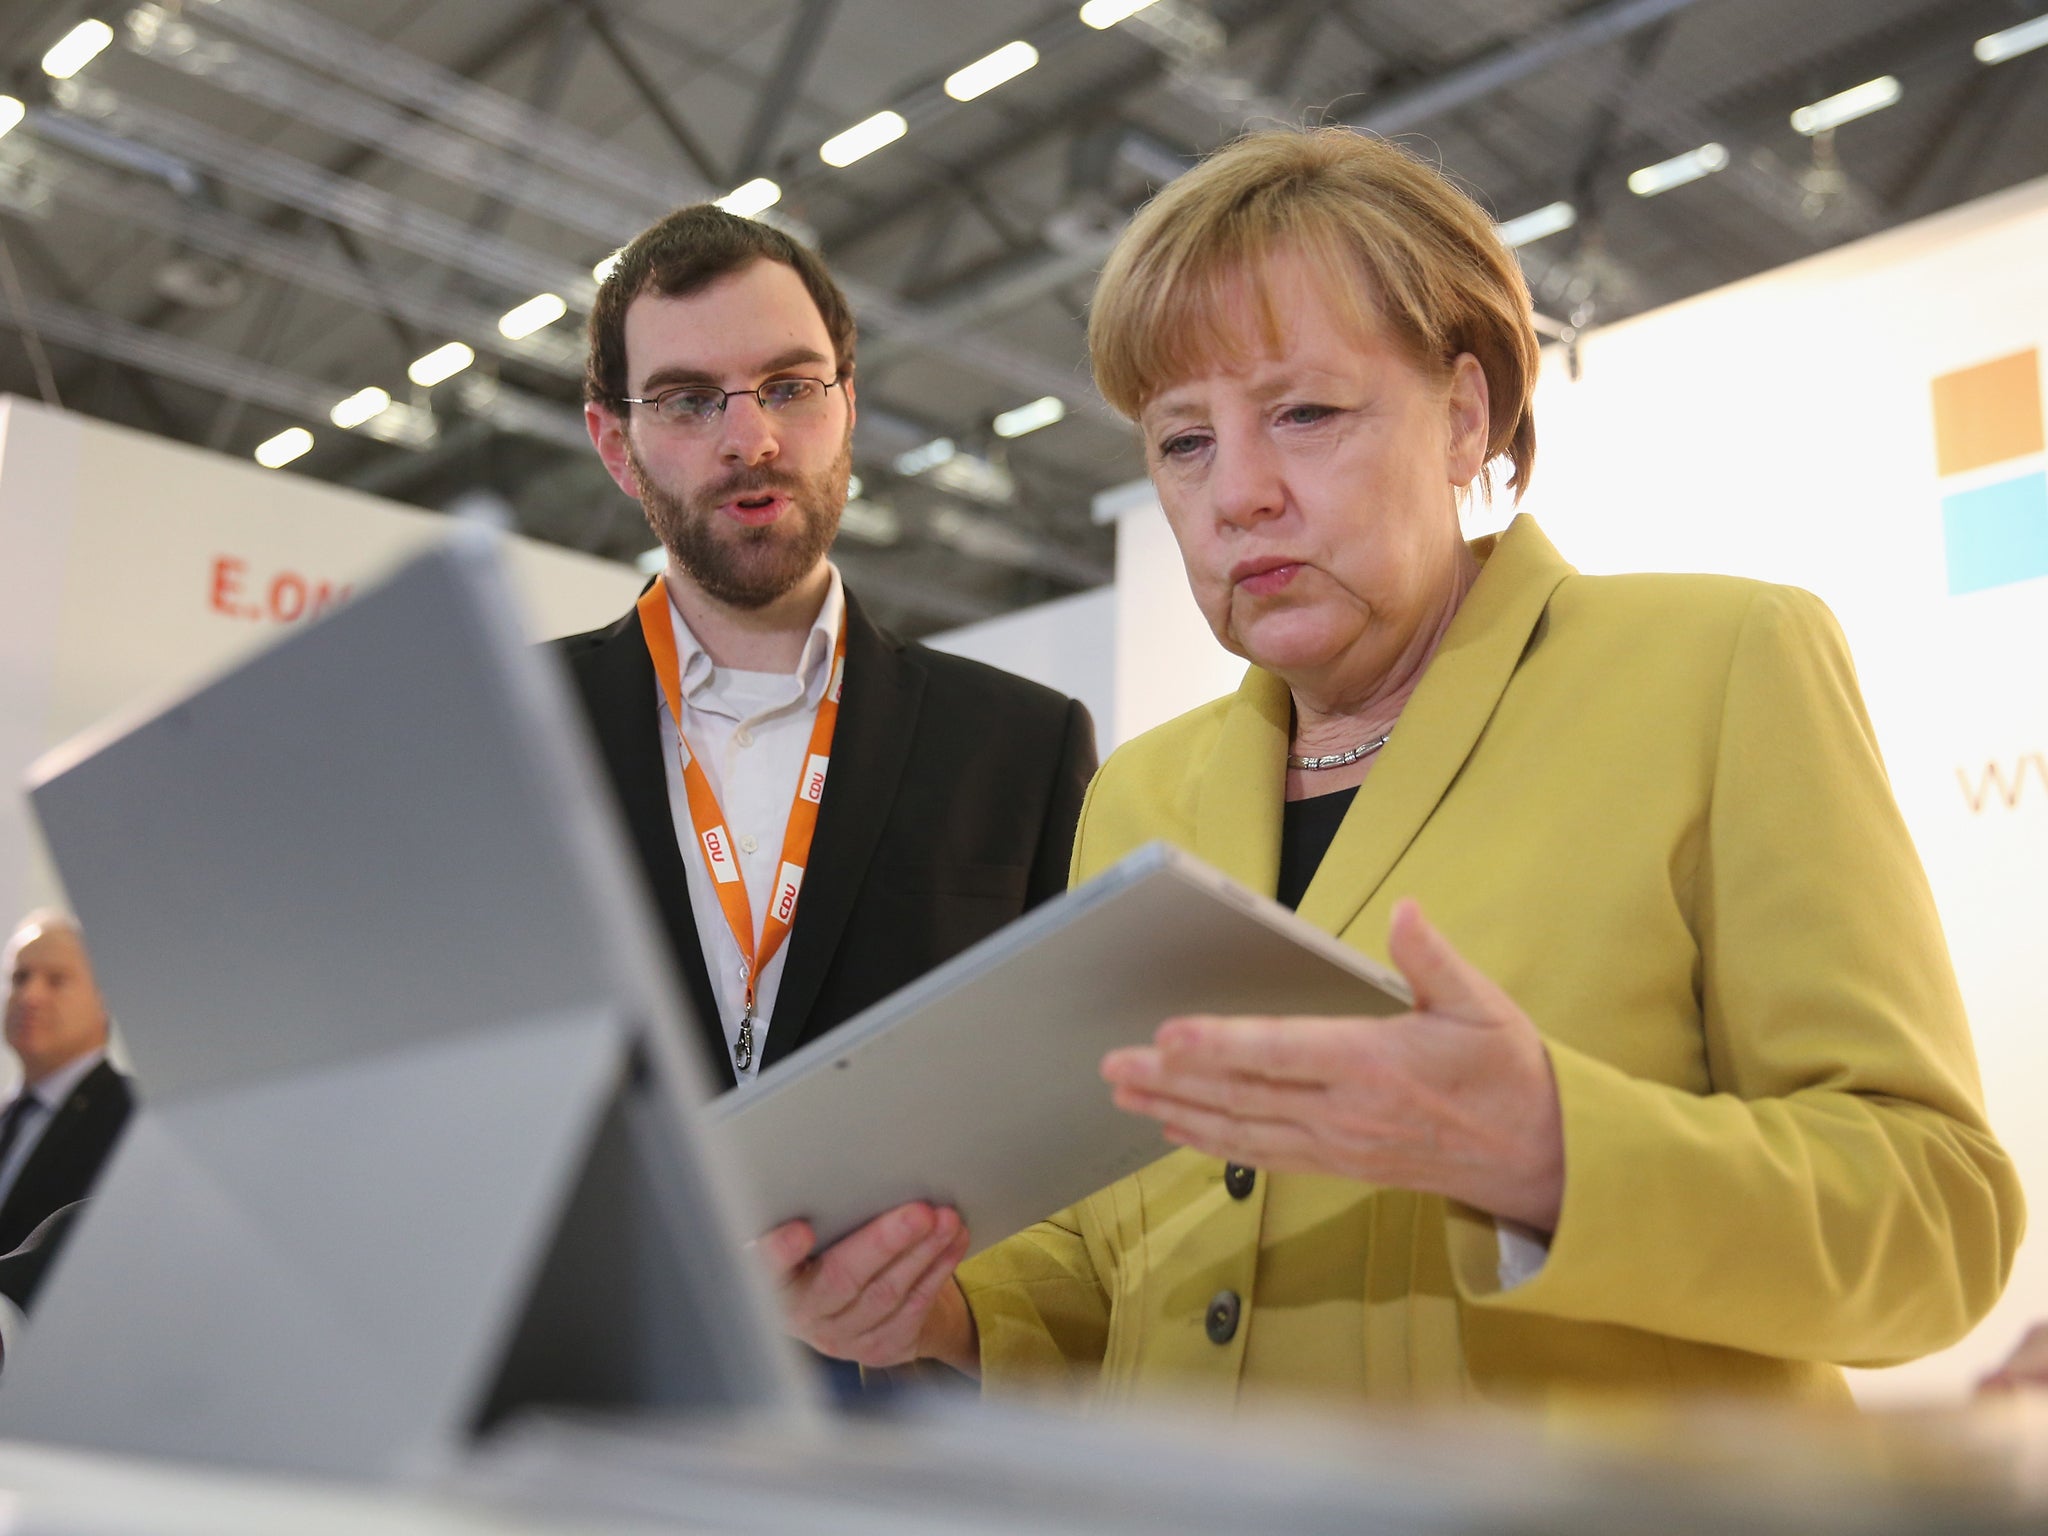 German Chancellor and Chairwoman of the German Christian Democrats (CDU) Angela Merkel looks at a tablet computer at the Microsoft stand while visiting exhibitors at the annual CDU party congress on December 10, 2014 in Cologne, Germany